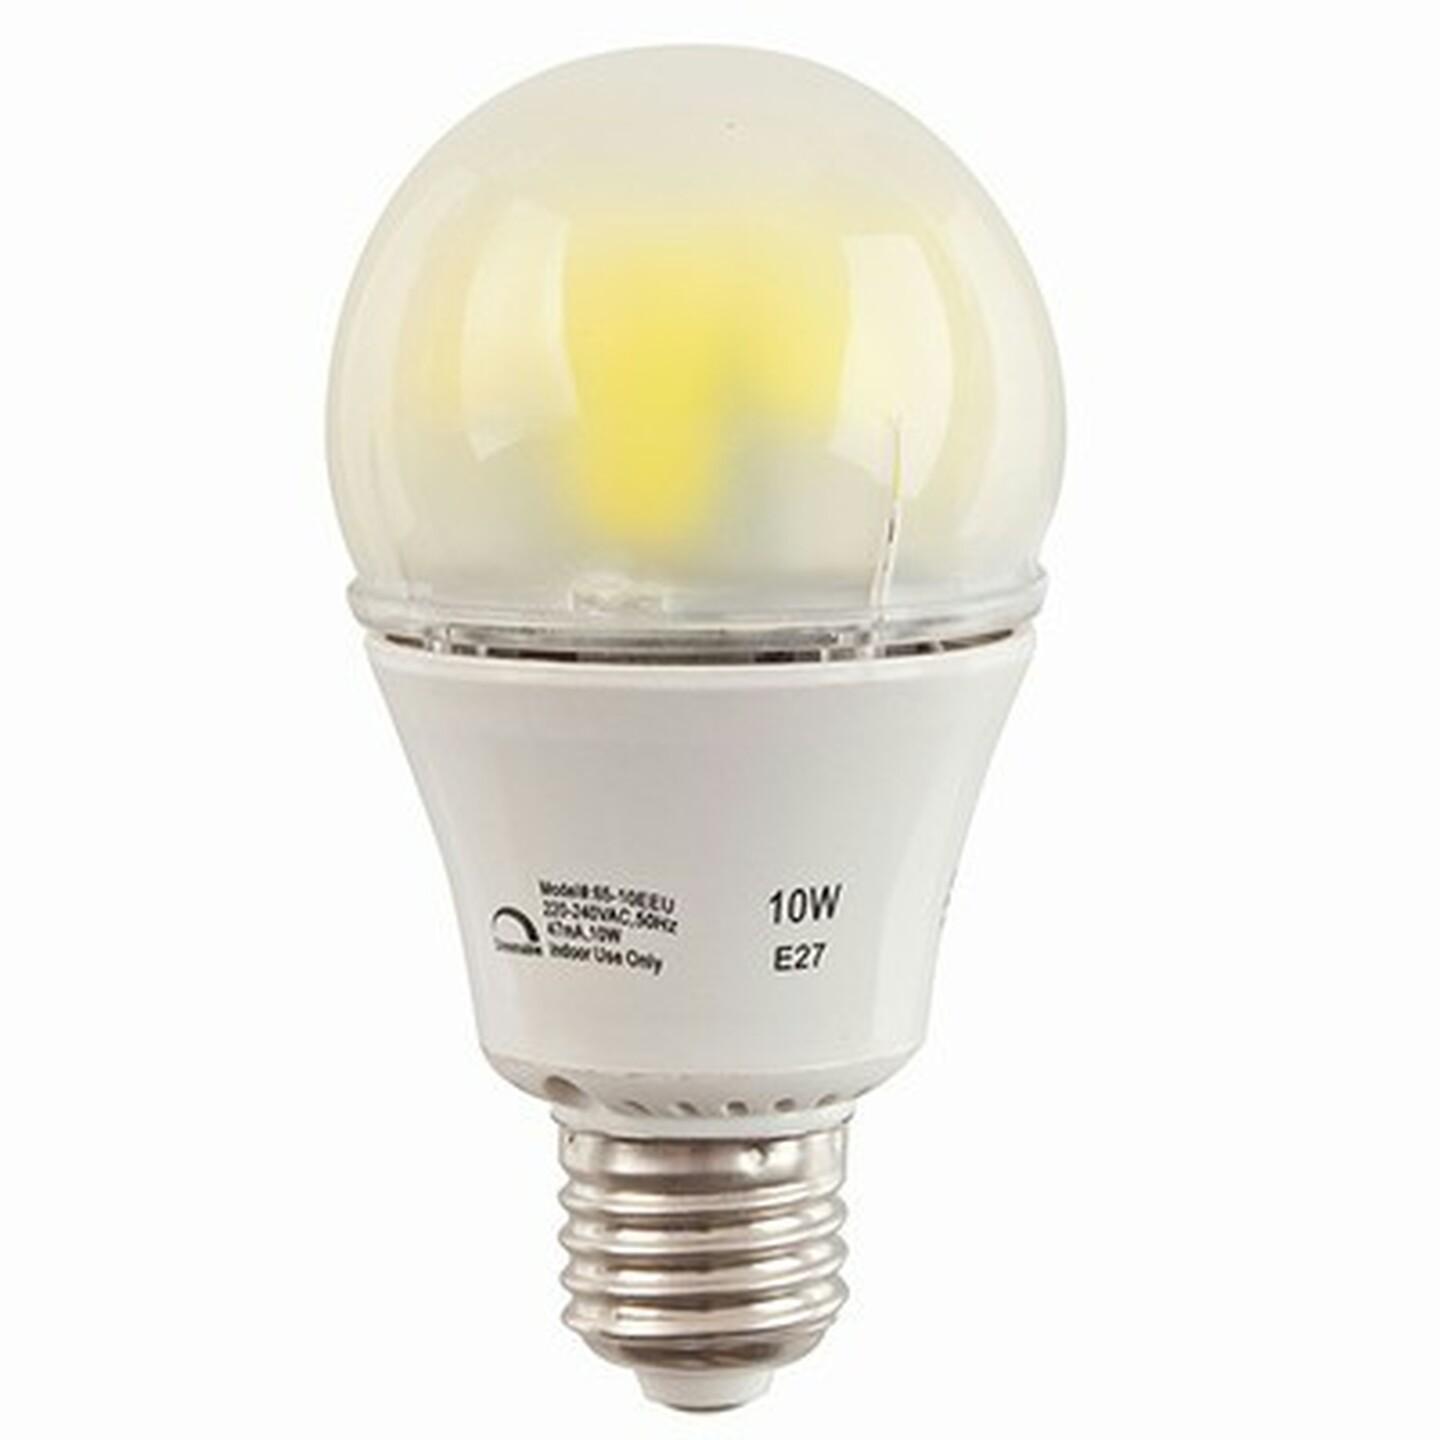 10W Dimmable Mains LED Light Globe Warm White Screw cap